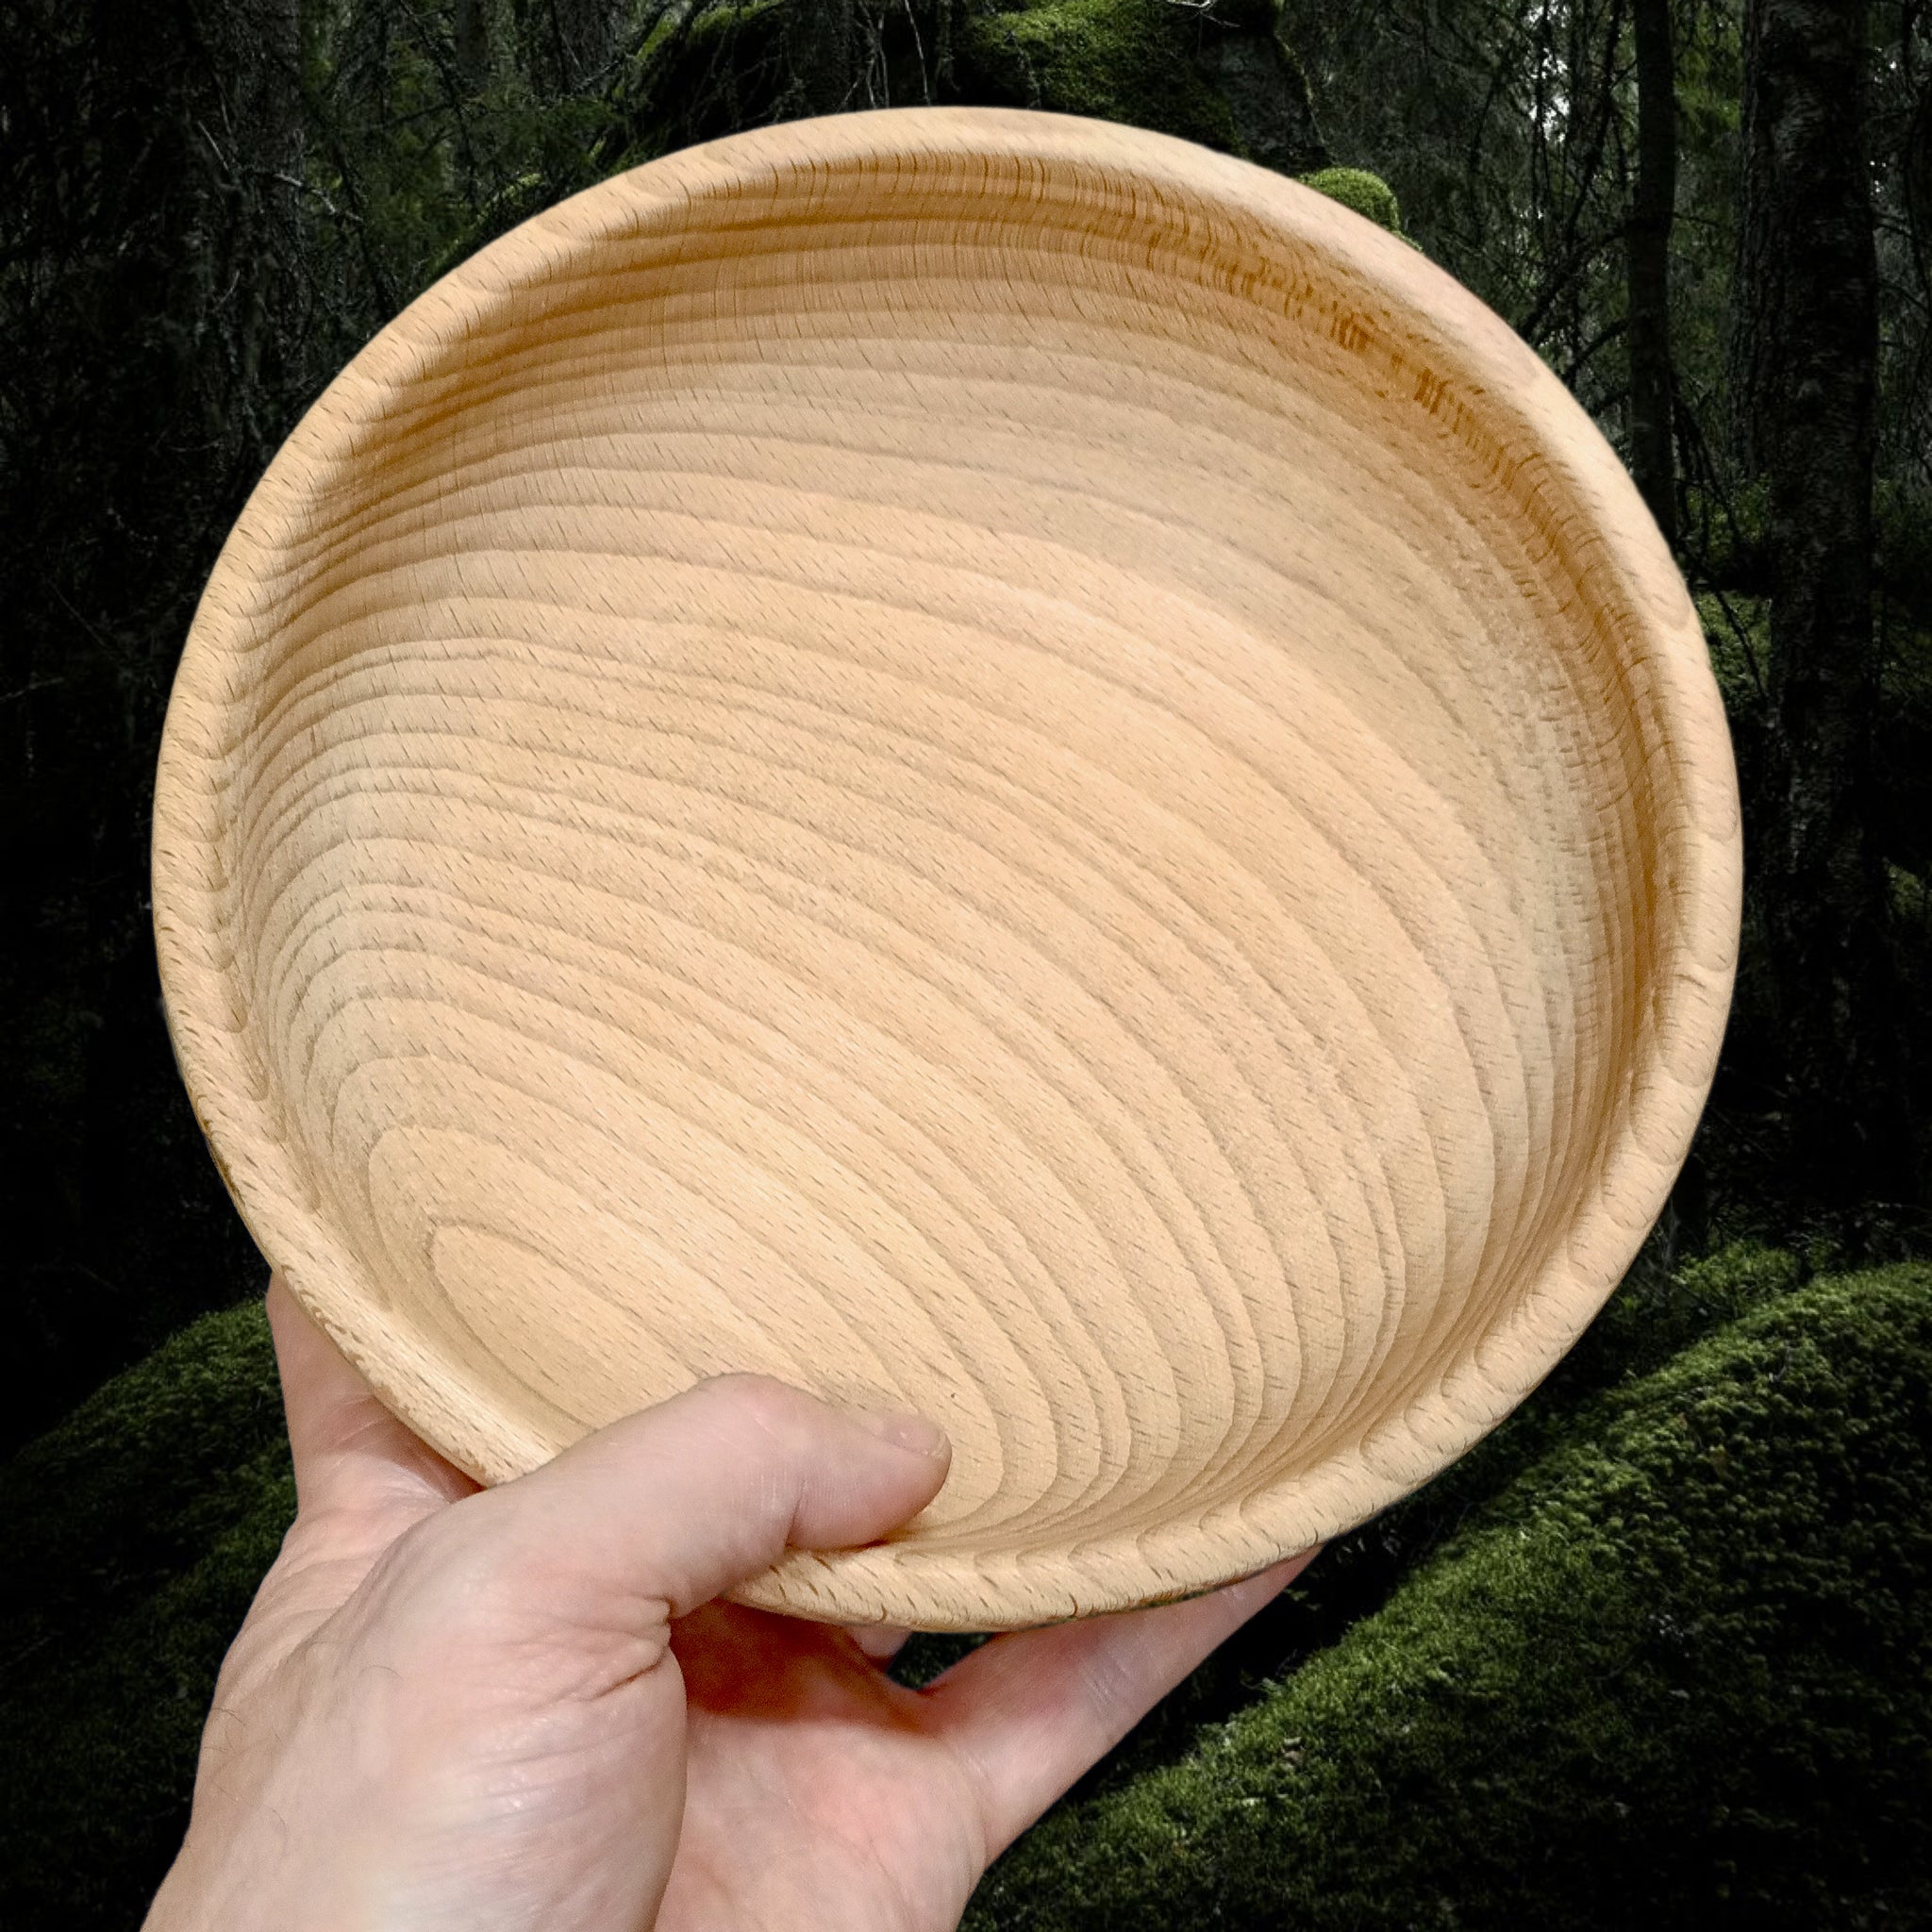 Large, Hand-Turned Medieval Wooden Bowl in hand - Top View